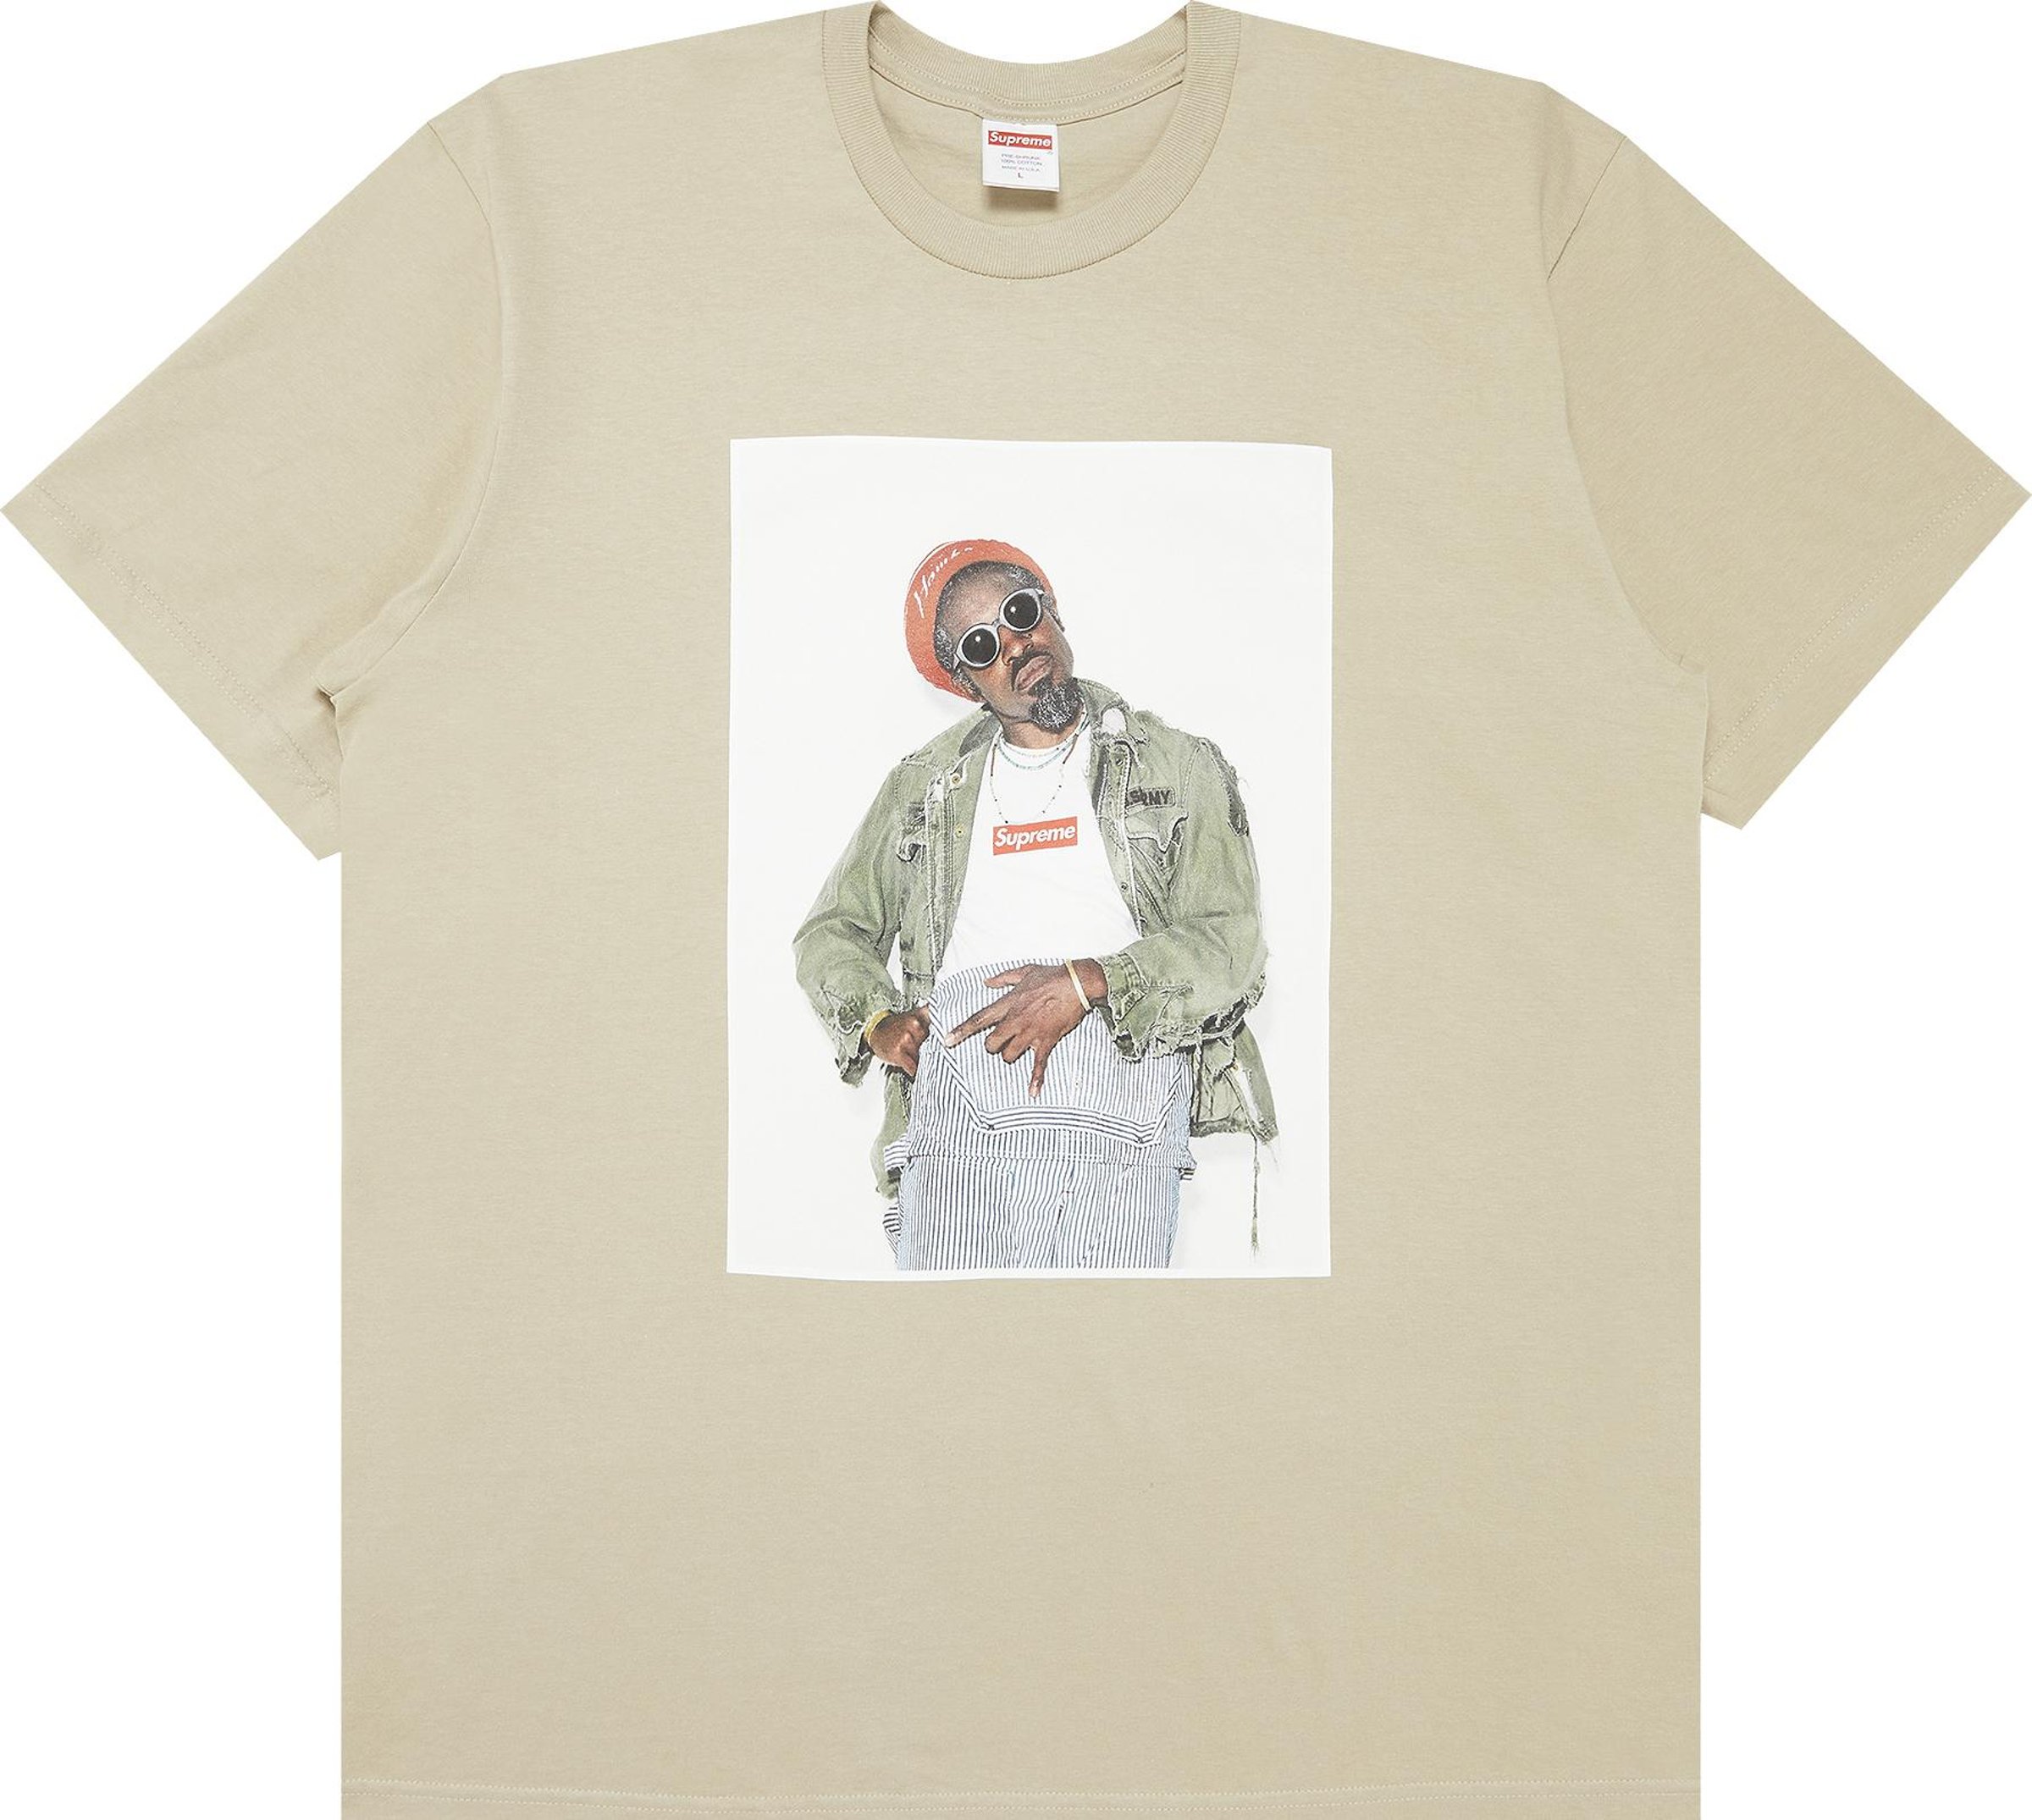 Buy Supreme André 3000 Tee 'Stone' - FW22T51 STONE | GOAT